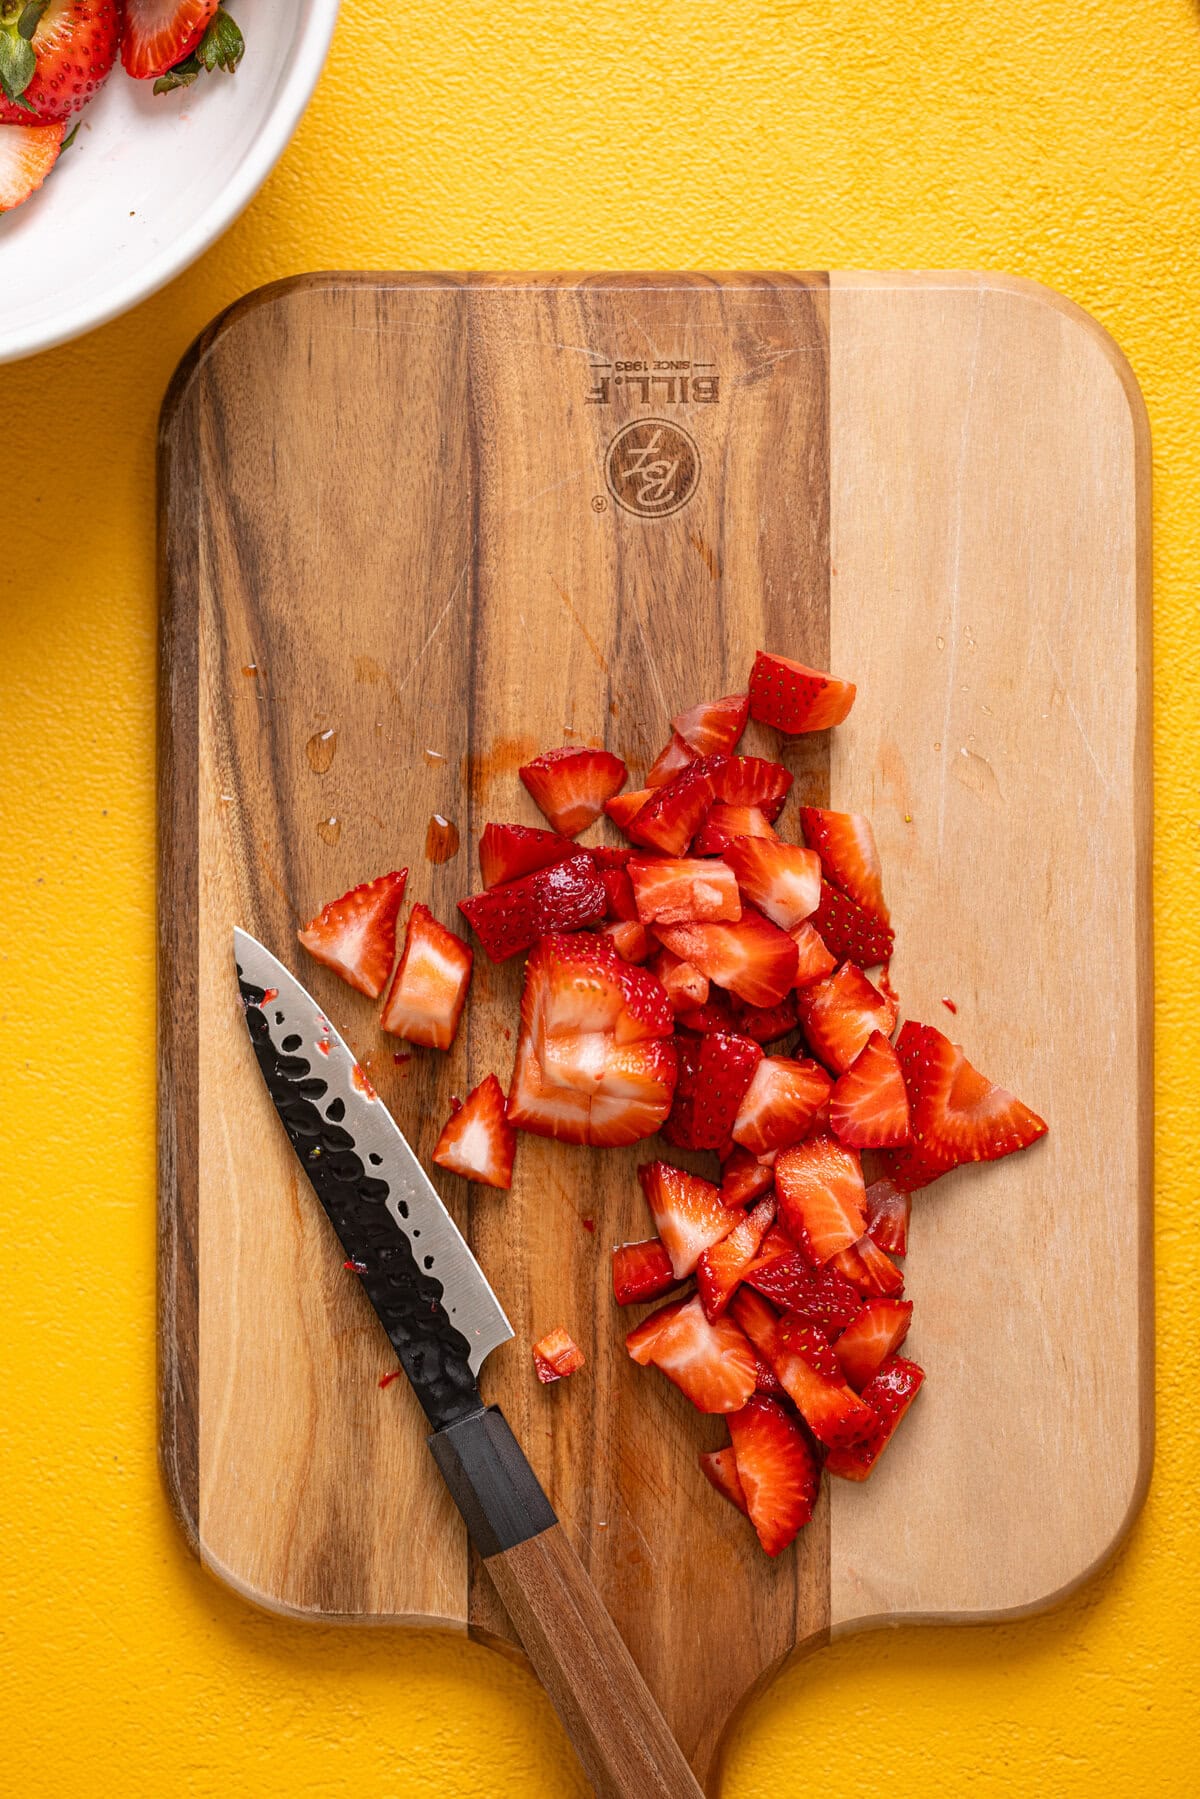 Diced strawberries on a cutting board with a knife.